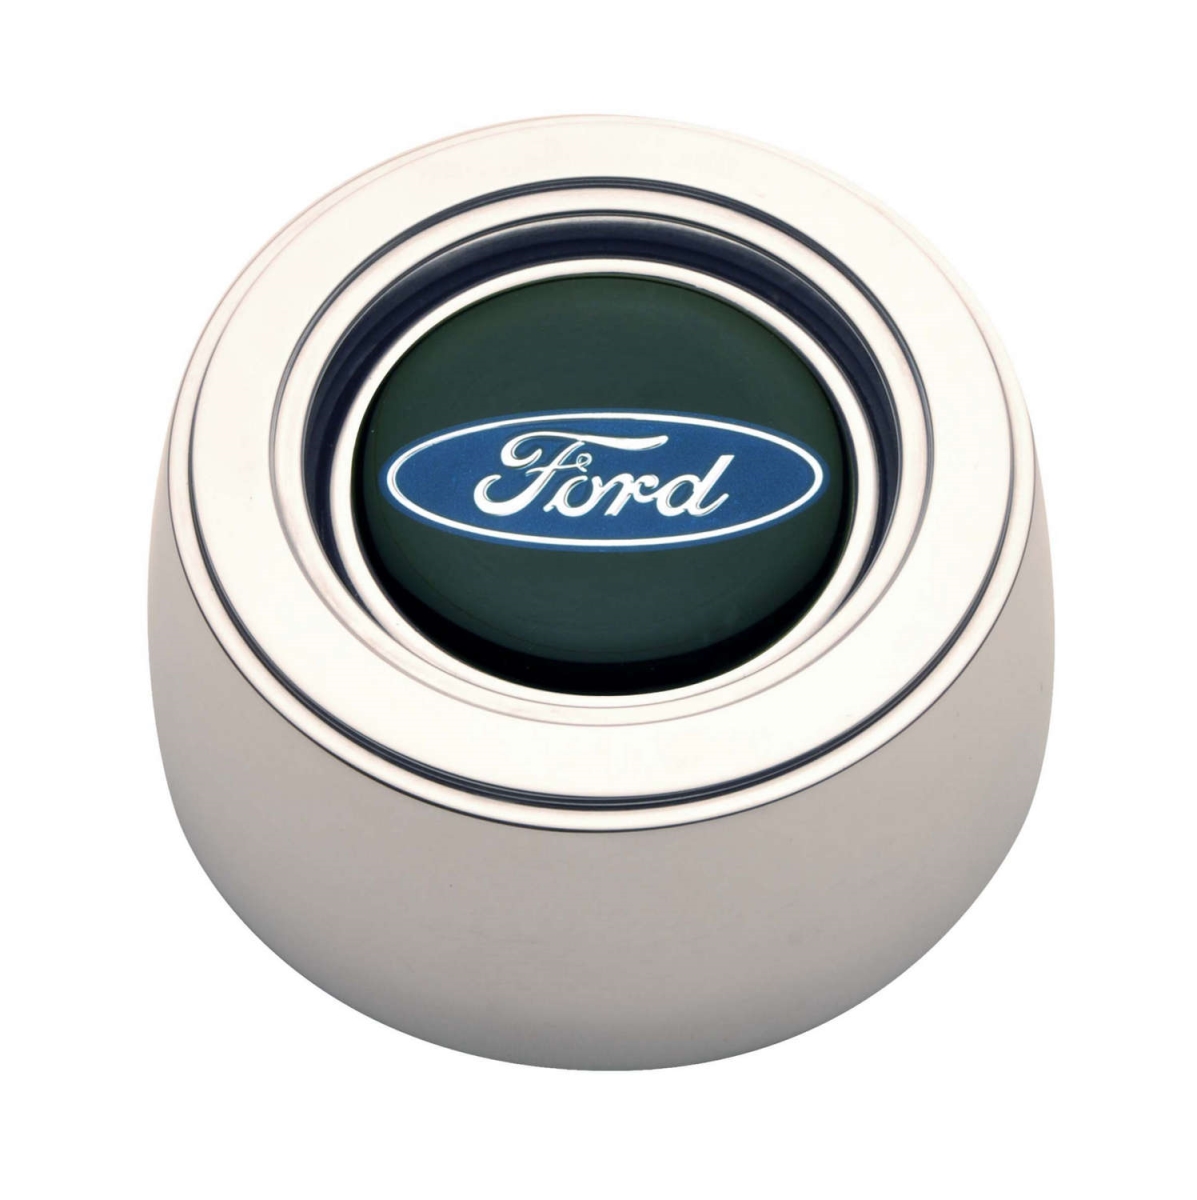 Picture of GT Performance 11-1521 GT3 Hi-Rise Ford Oval Color Horn Button Polished Emblem